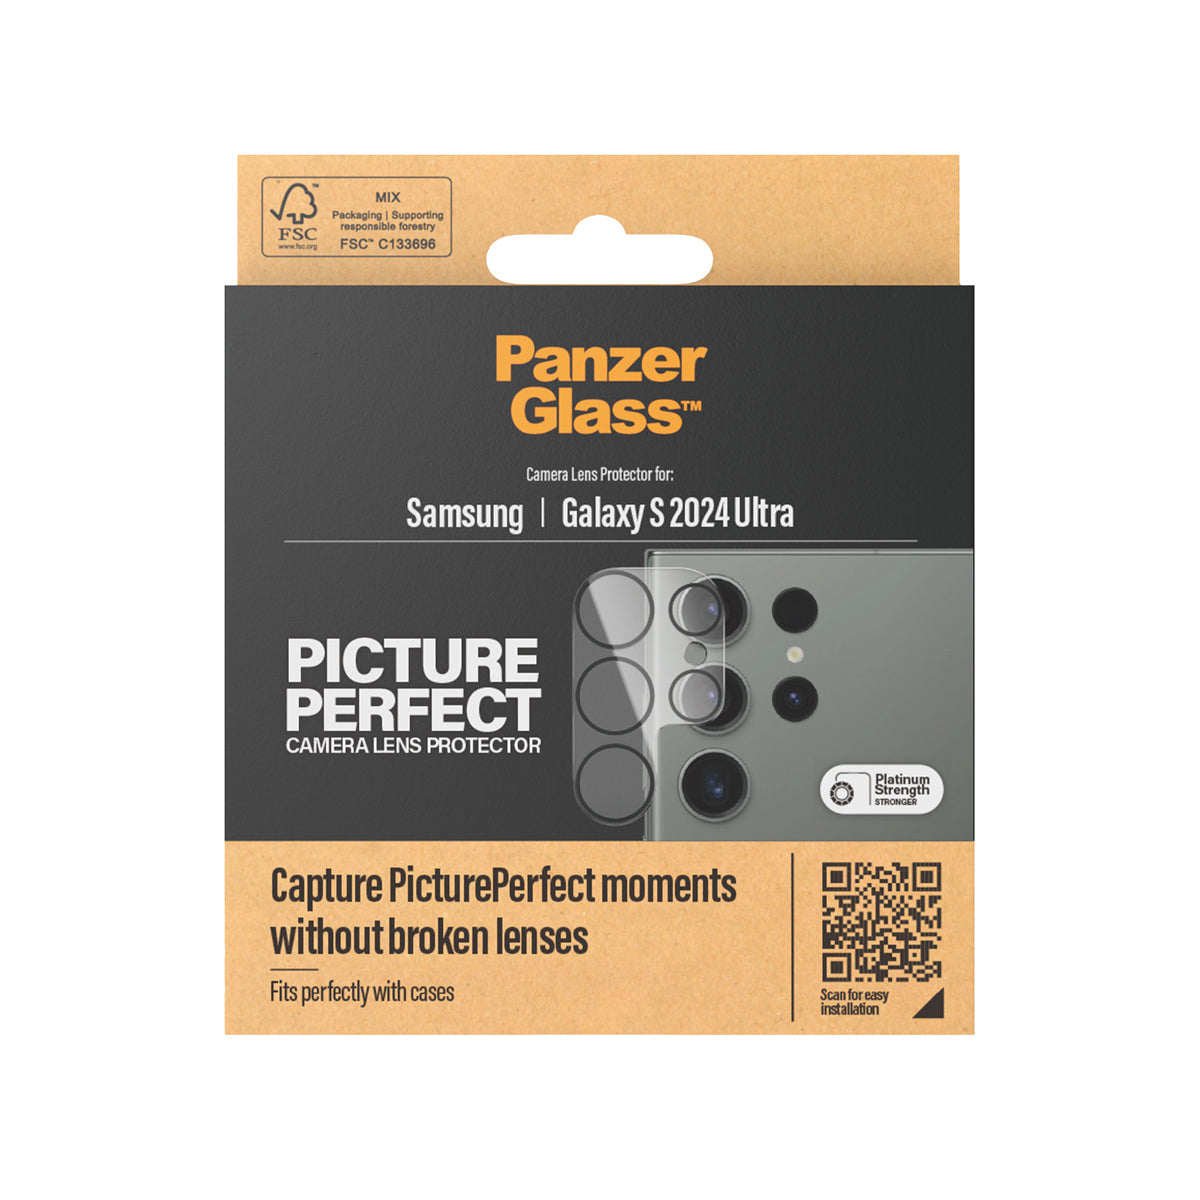 PanzerGlass PicturePerfect Camera Lens Protector for Samsung Galaxy S24 Ultra